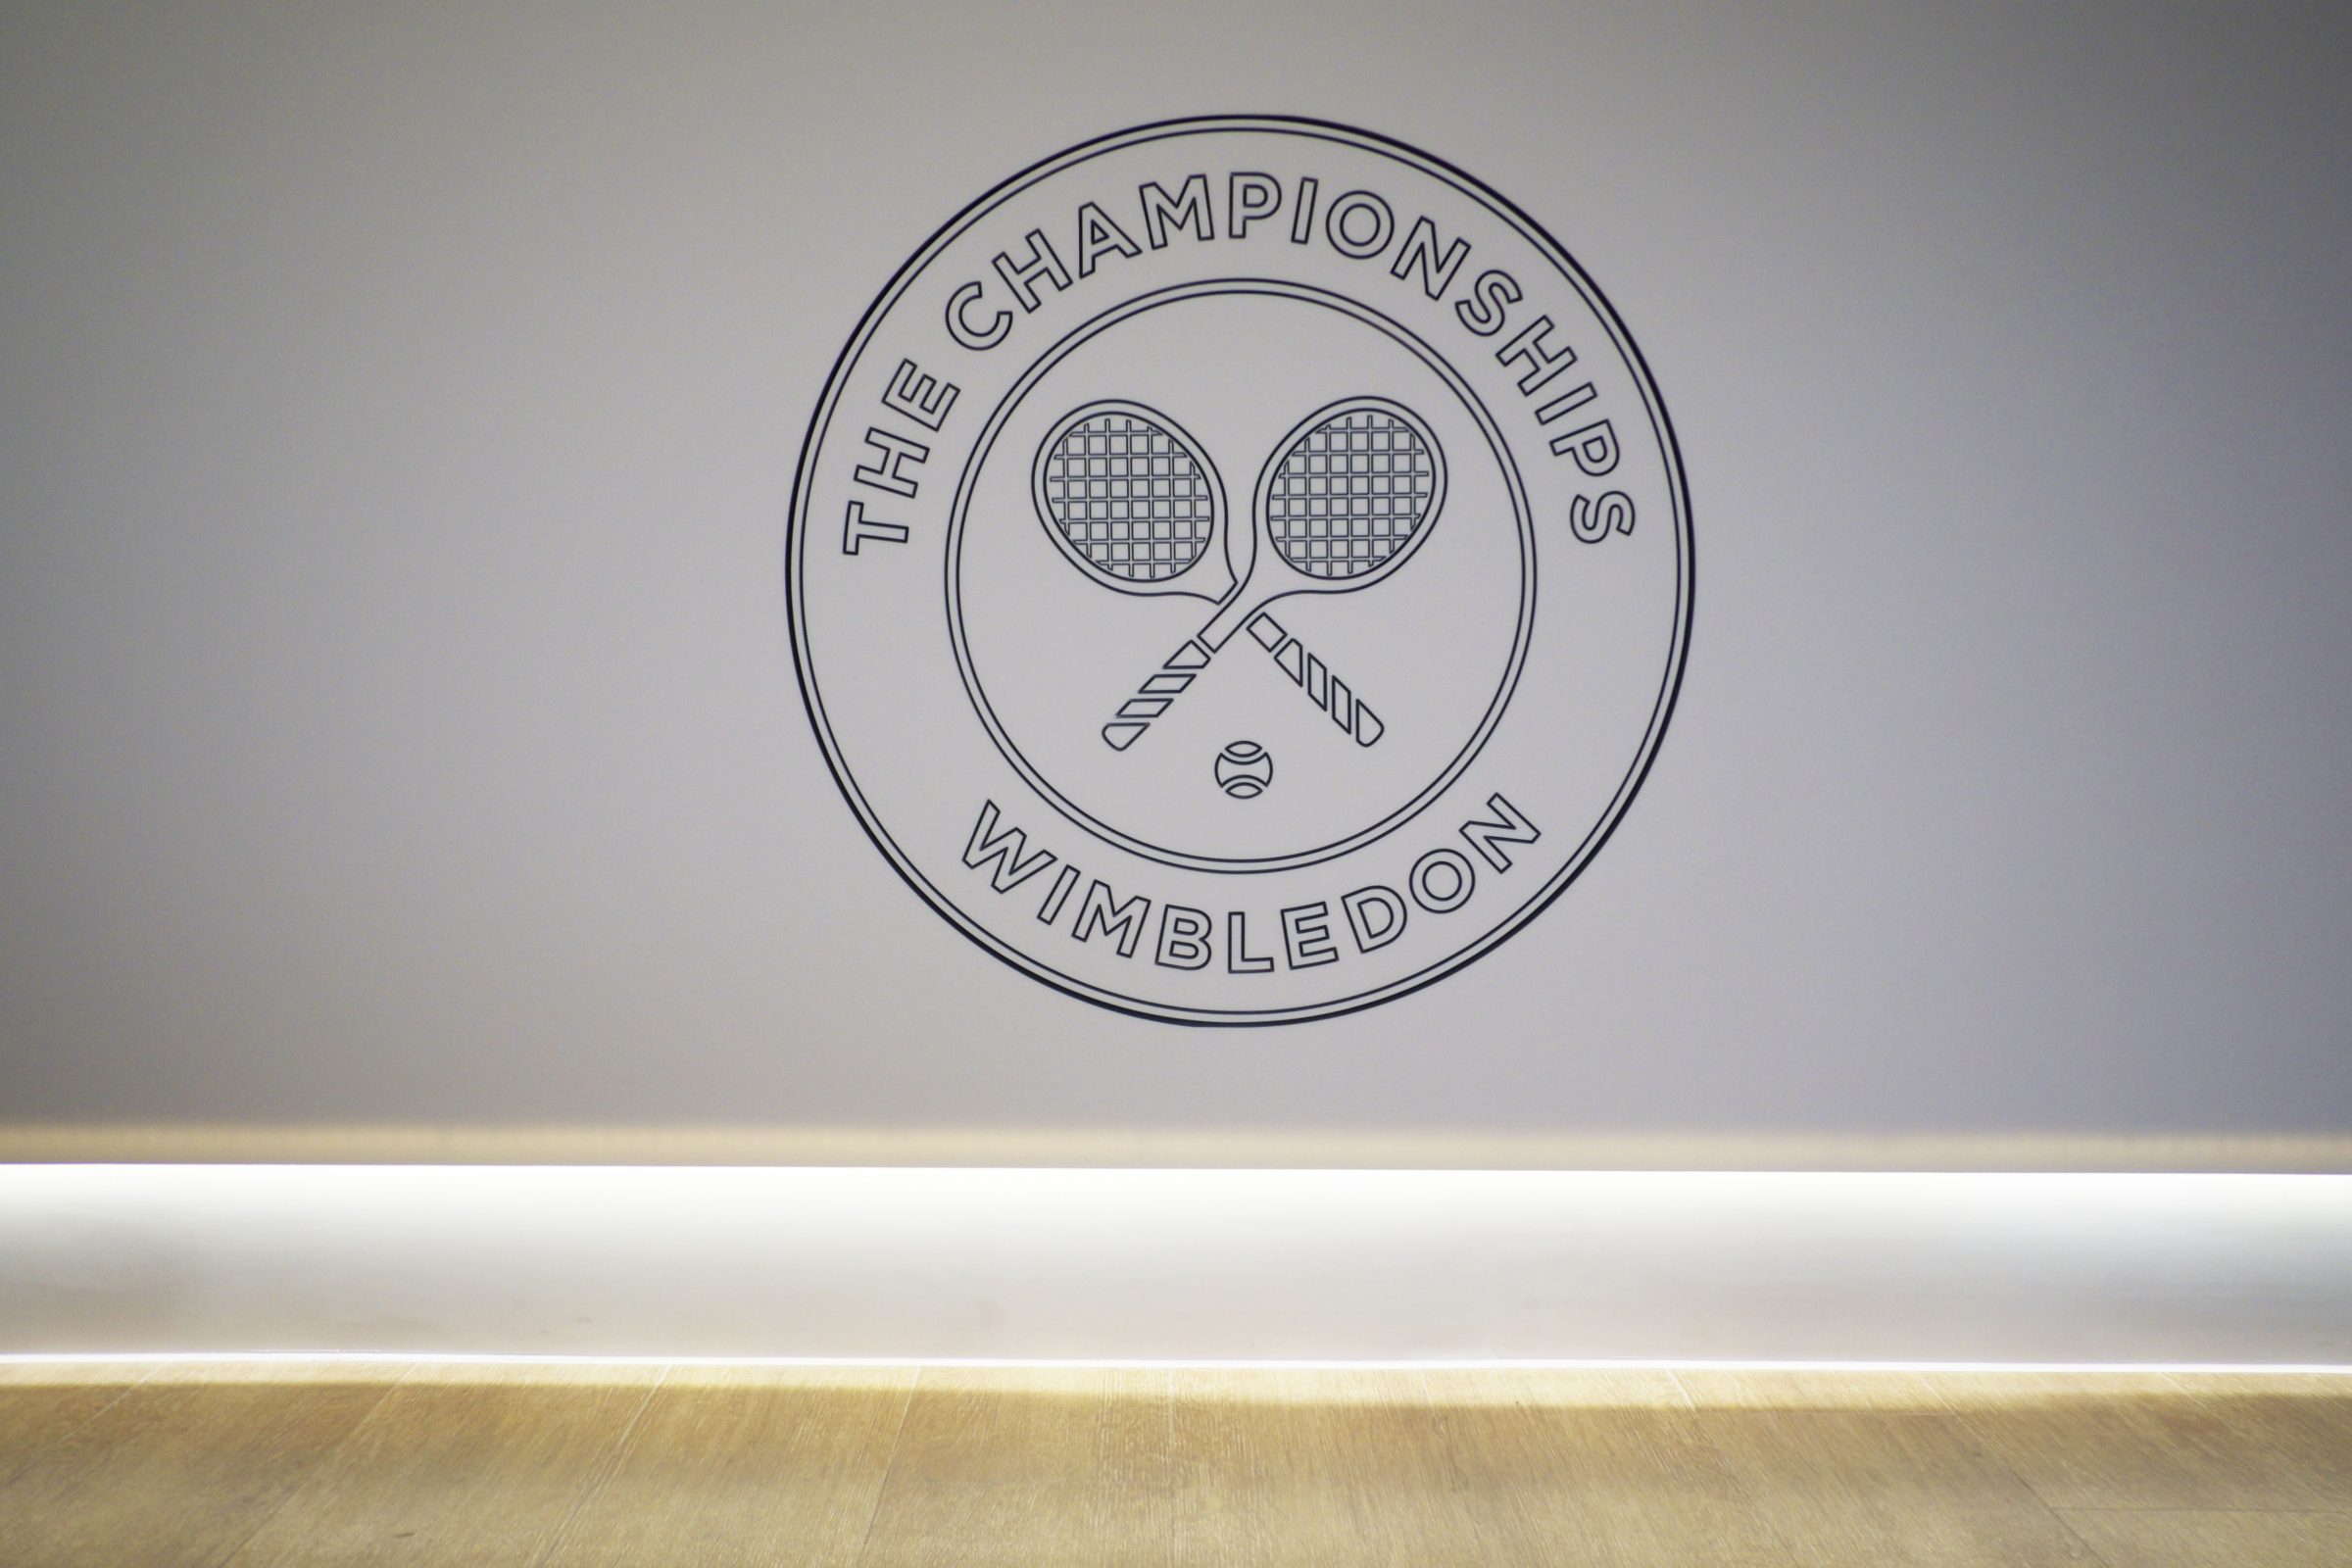 Joinery fit-out for The AELTC at Wimbledon Tennis Club